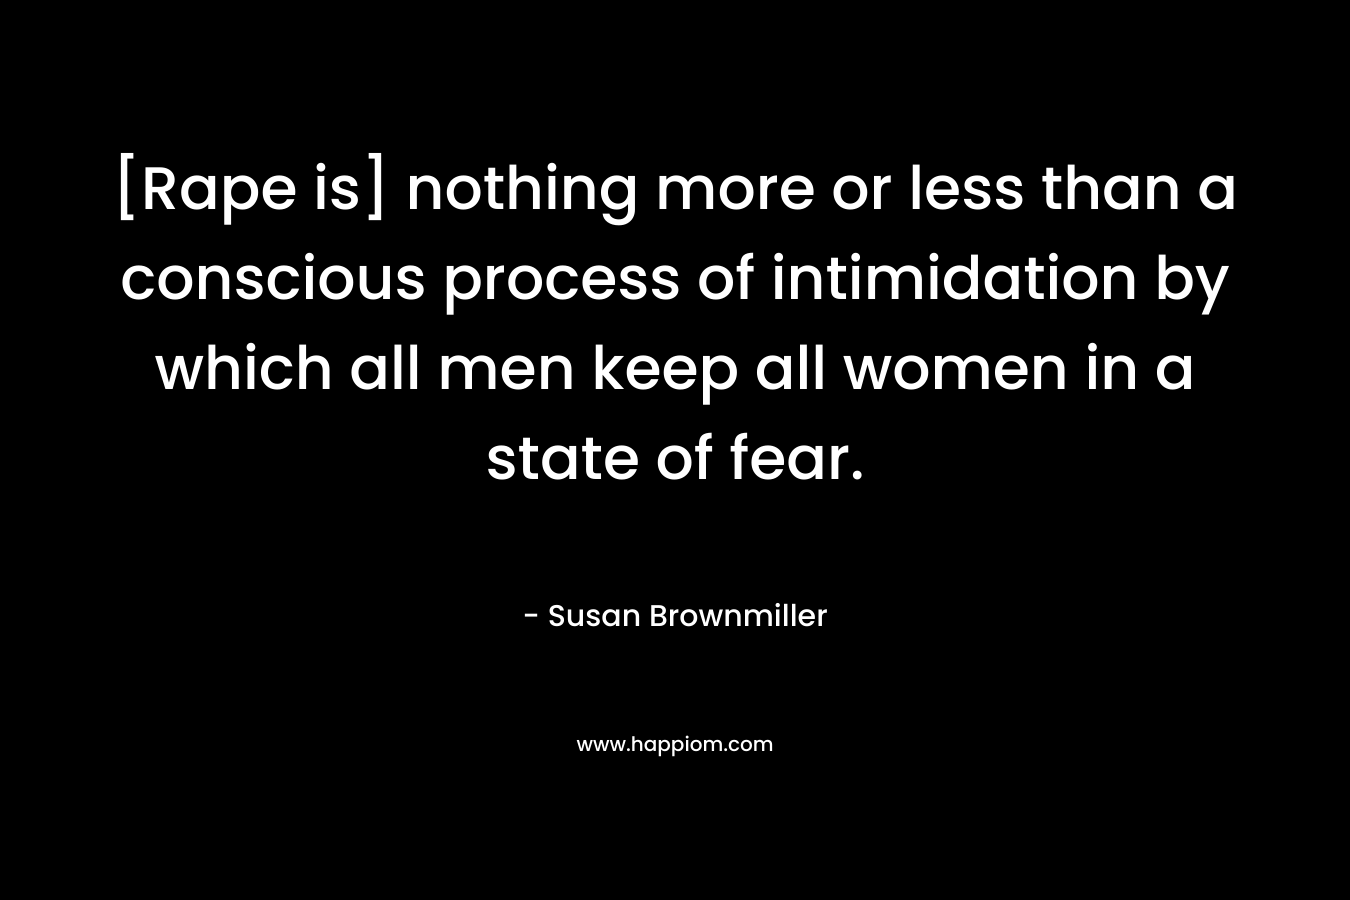 [Rape is] nothing more or less than a conscious process of intimidation by which all men keep all women in a state of fear.